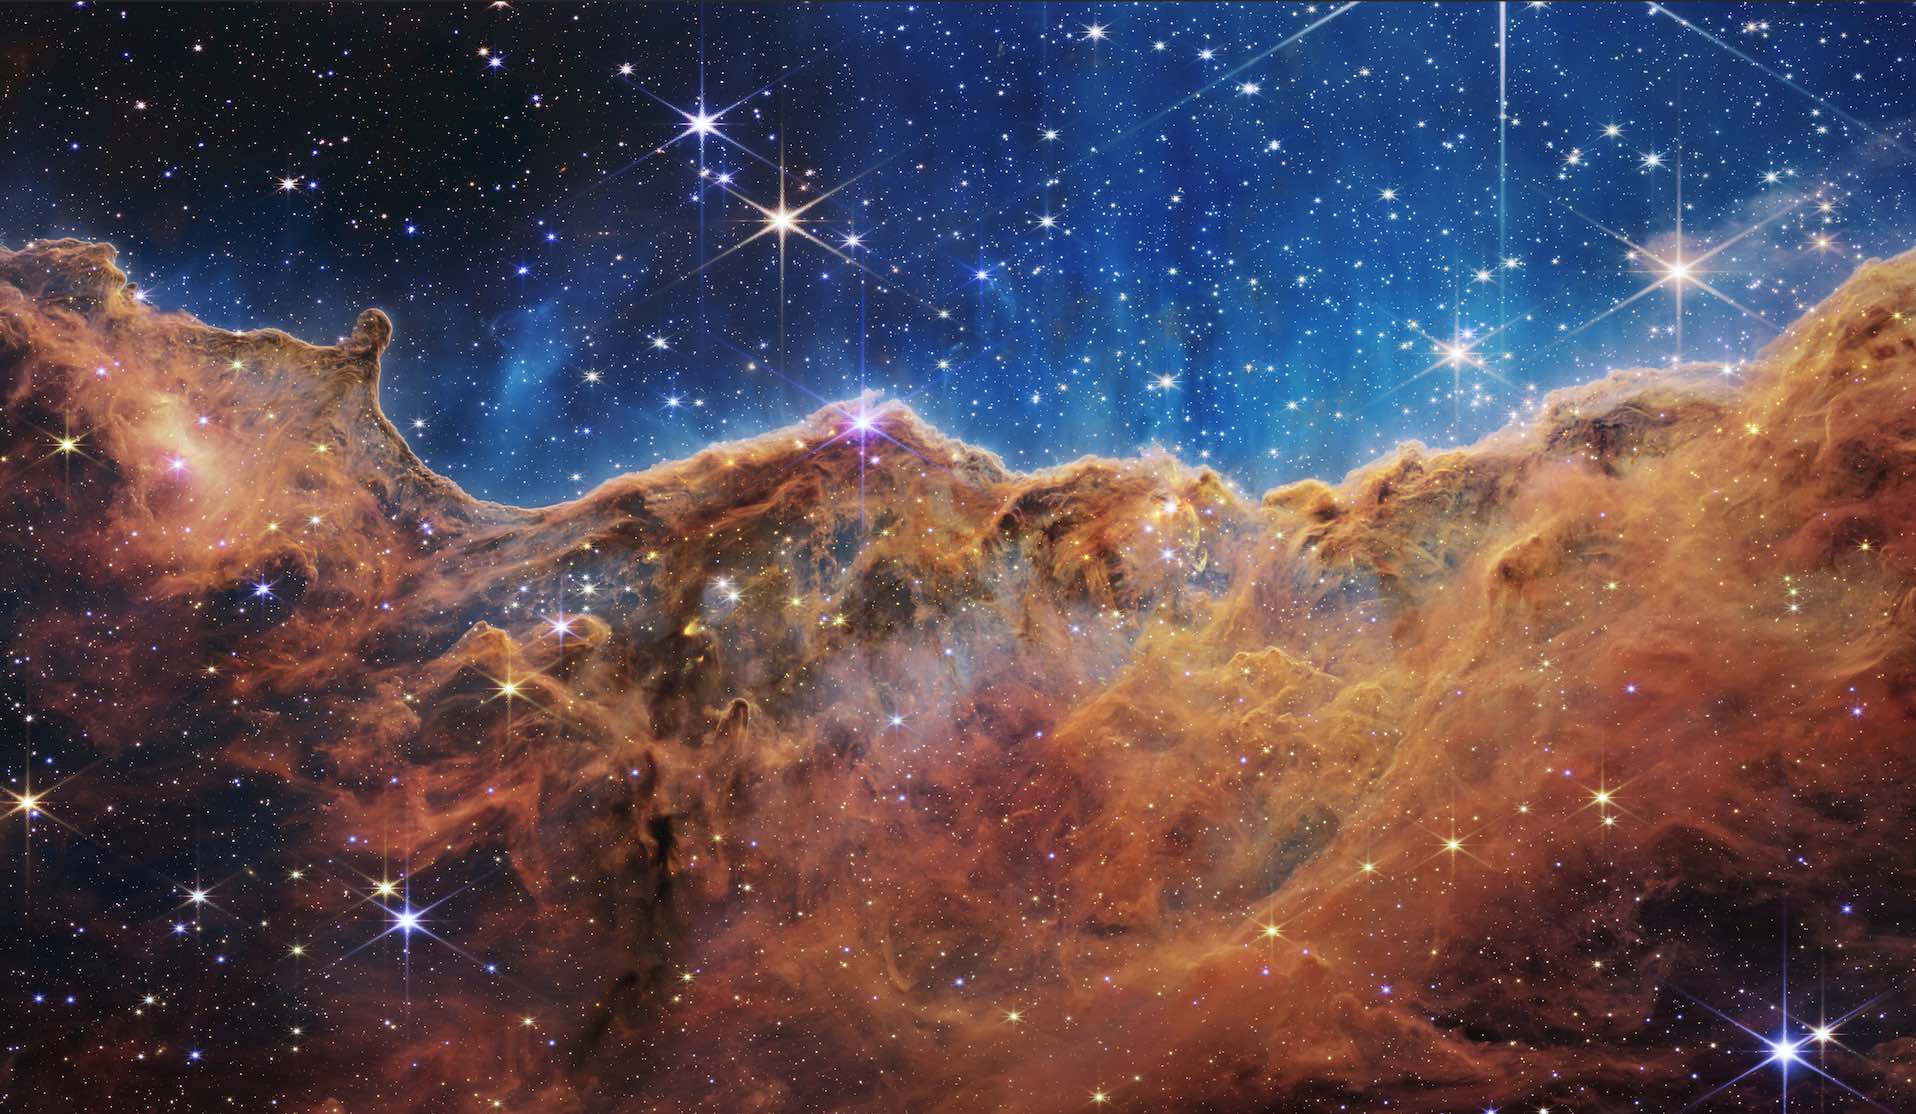 A large wall of orange star material in space, the sky above is blue against the black sky